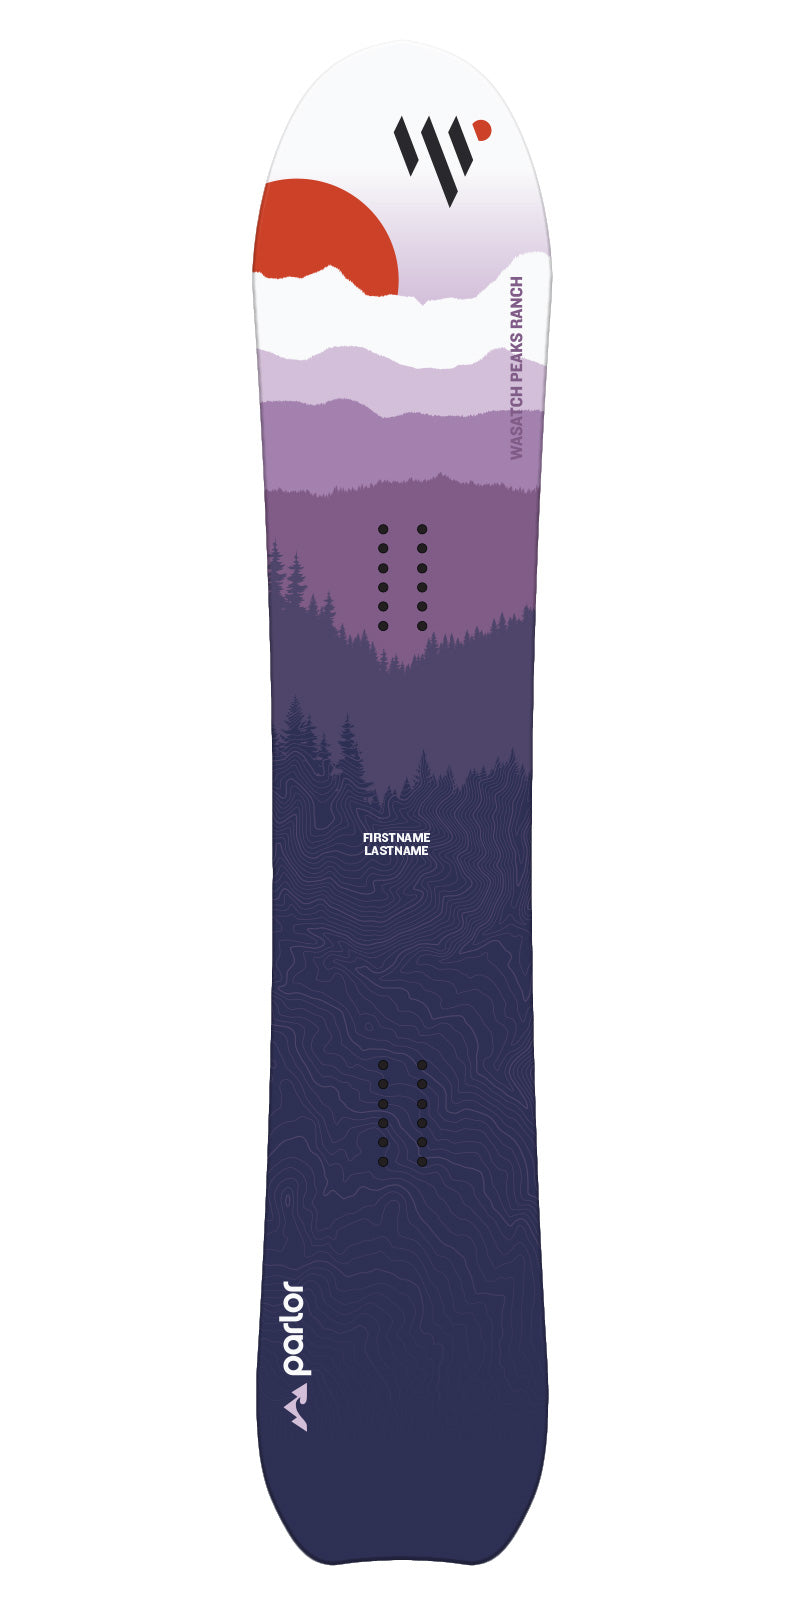 Parlor Snowboards for Wasatch Peaks Ranch